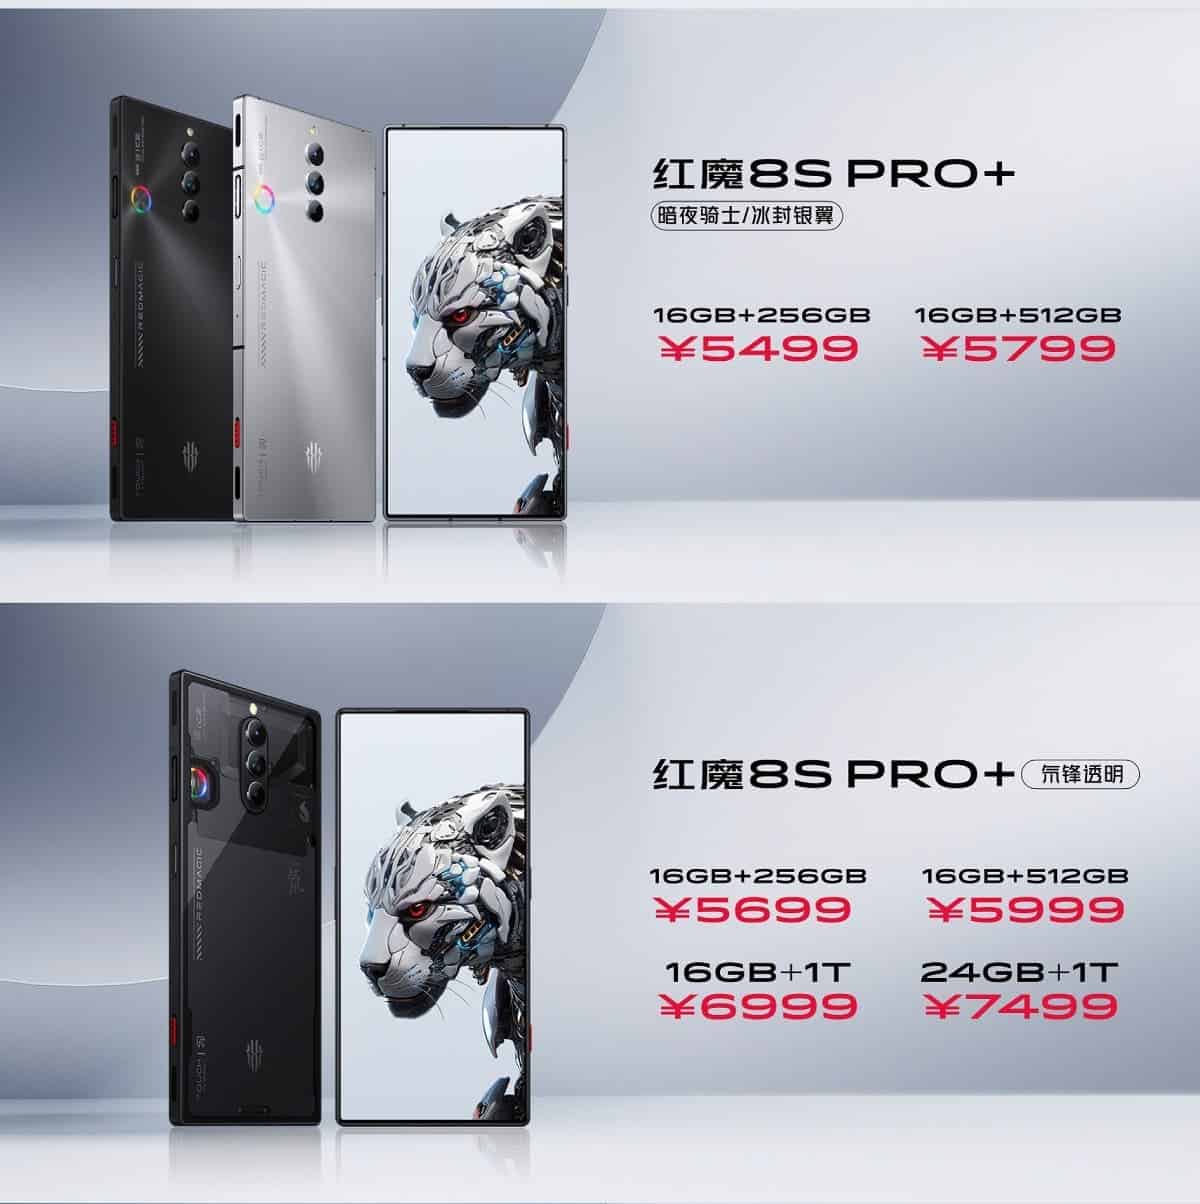 Red Magic 9 Pro and Pro+ official with SD 8 Gen 3 up to 24GB RAM